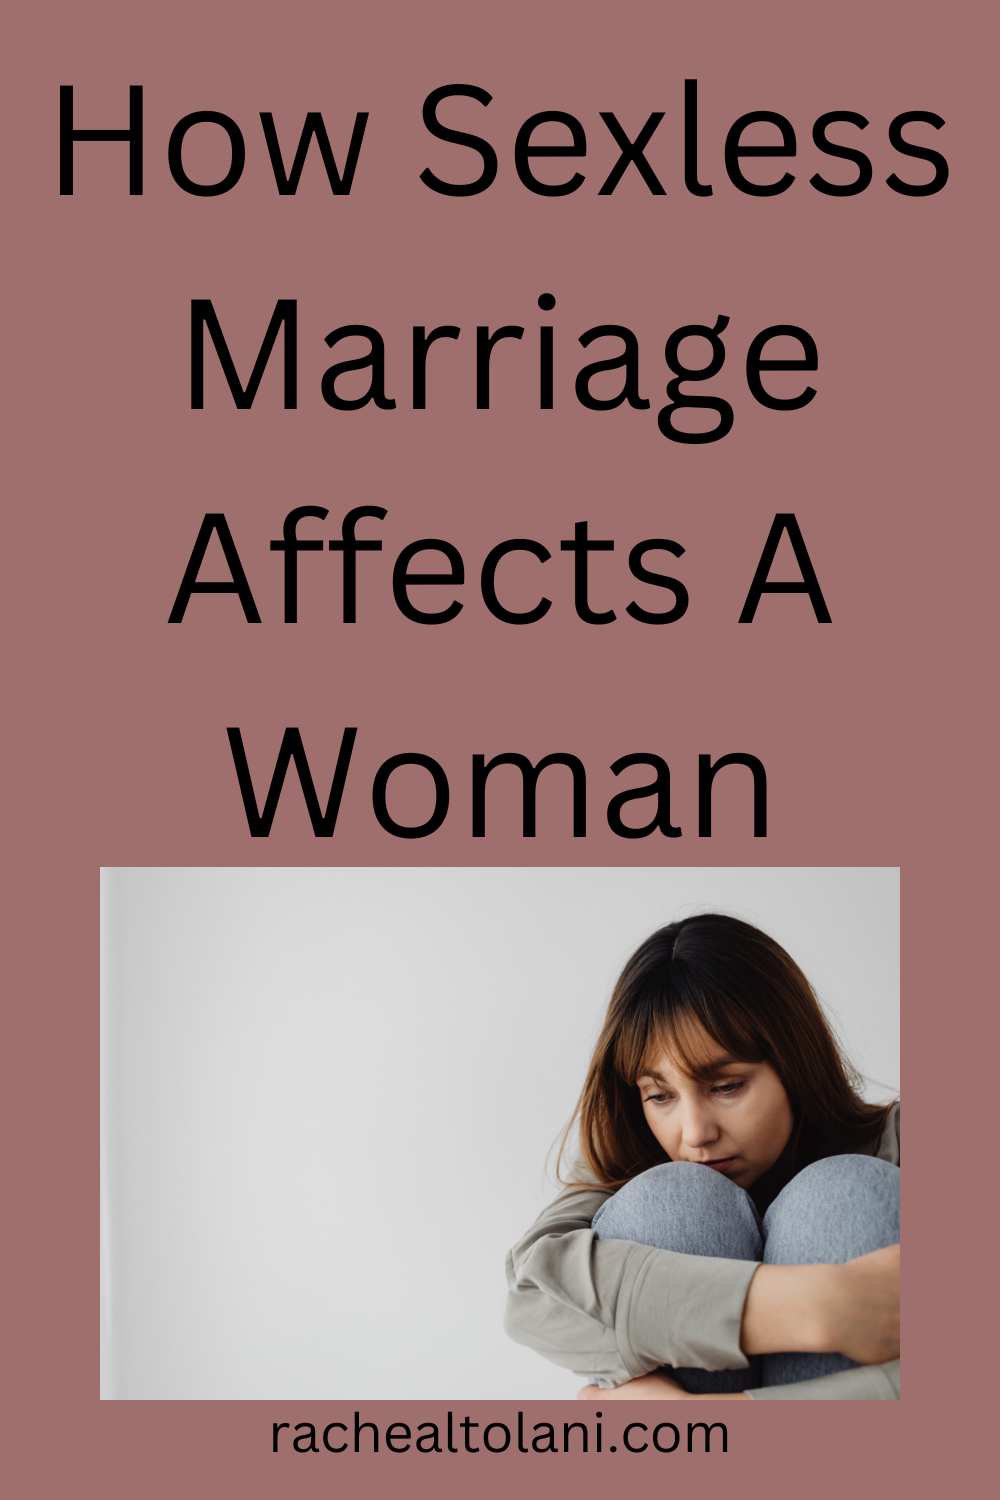 Effect of sexless marriage on women